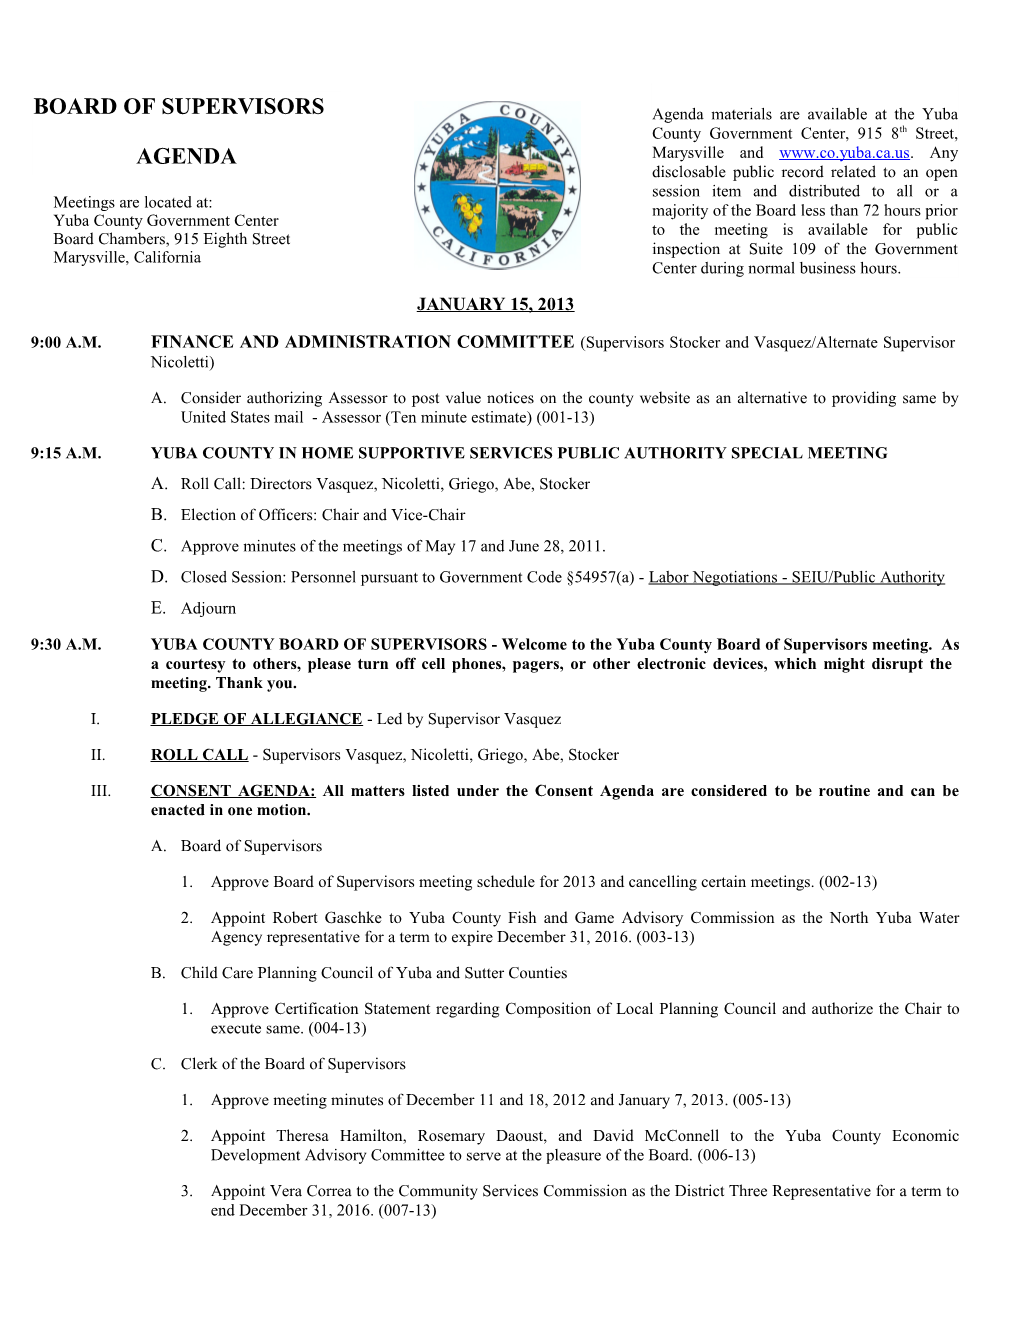 9:15 A.M.Yuba County in Home Supportive Services Public Authority Special Meeting